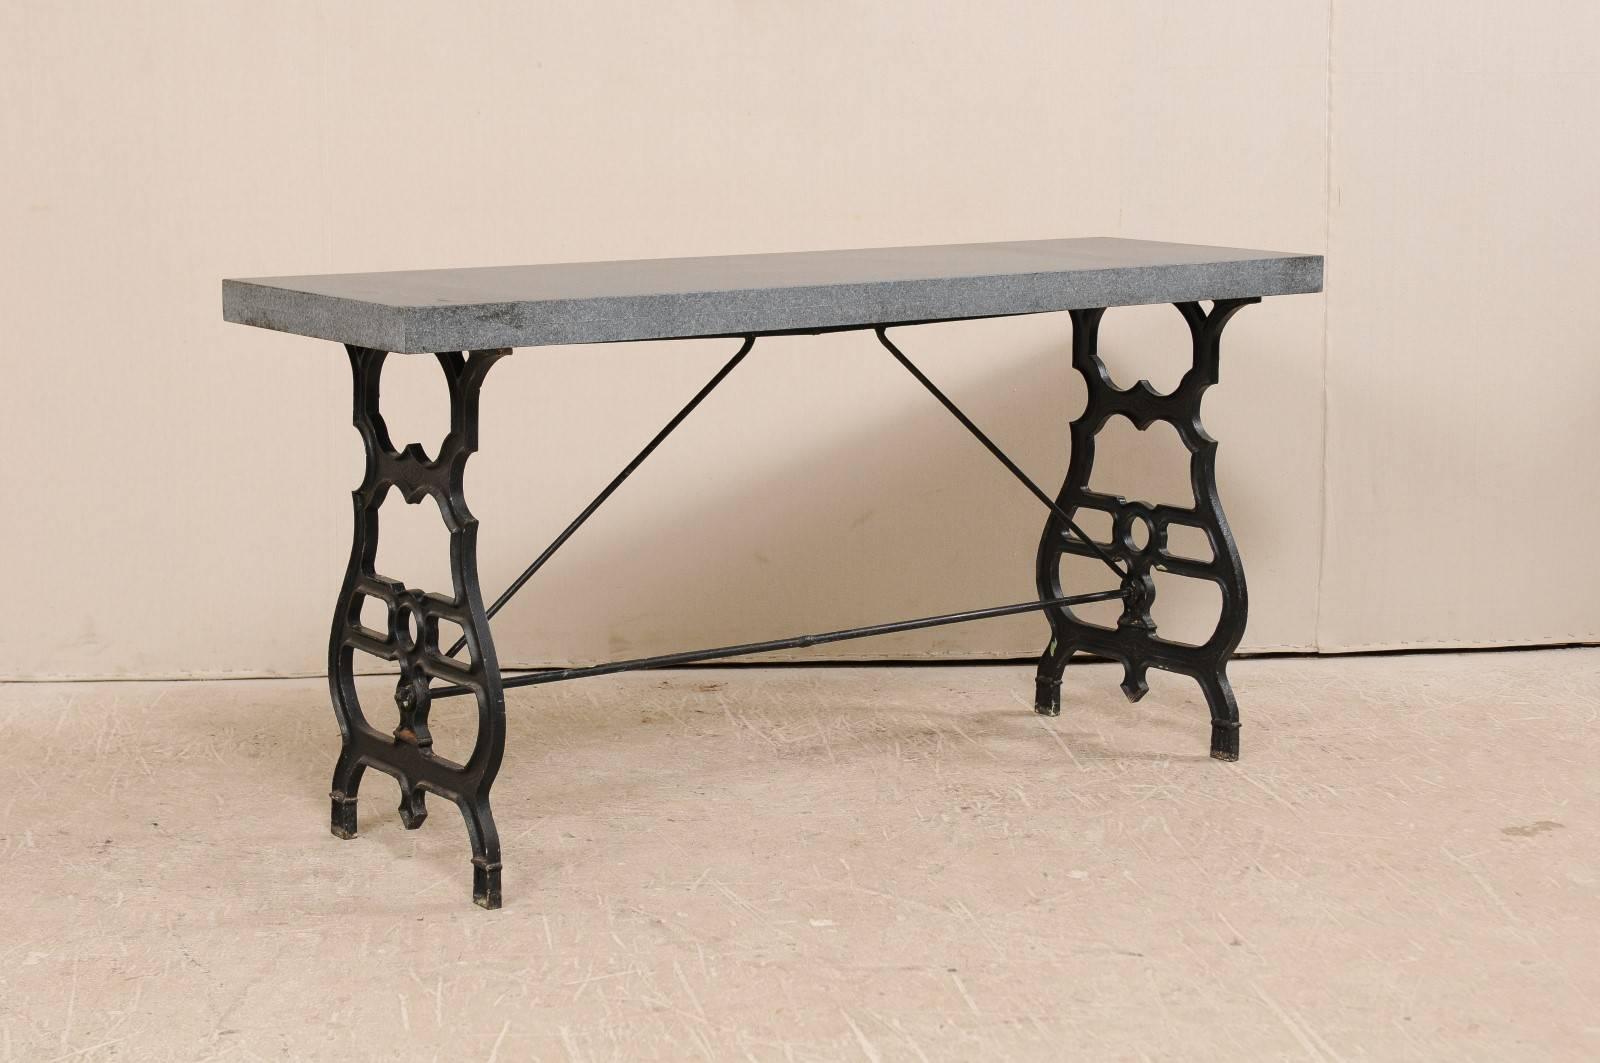 An antique French iron table with granite top. This French table, from the early 20th century, features a black iron base with a newer addition of a gray colored honed granite top. The base consists to two thin profiled sides, ornately forged and